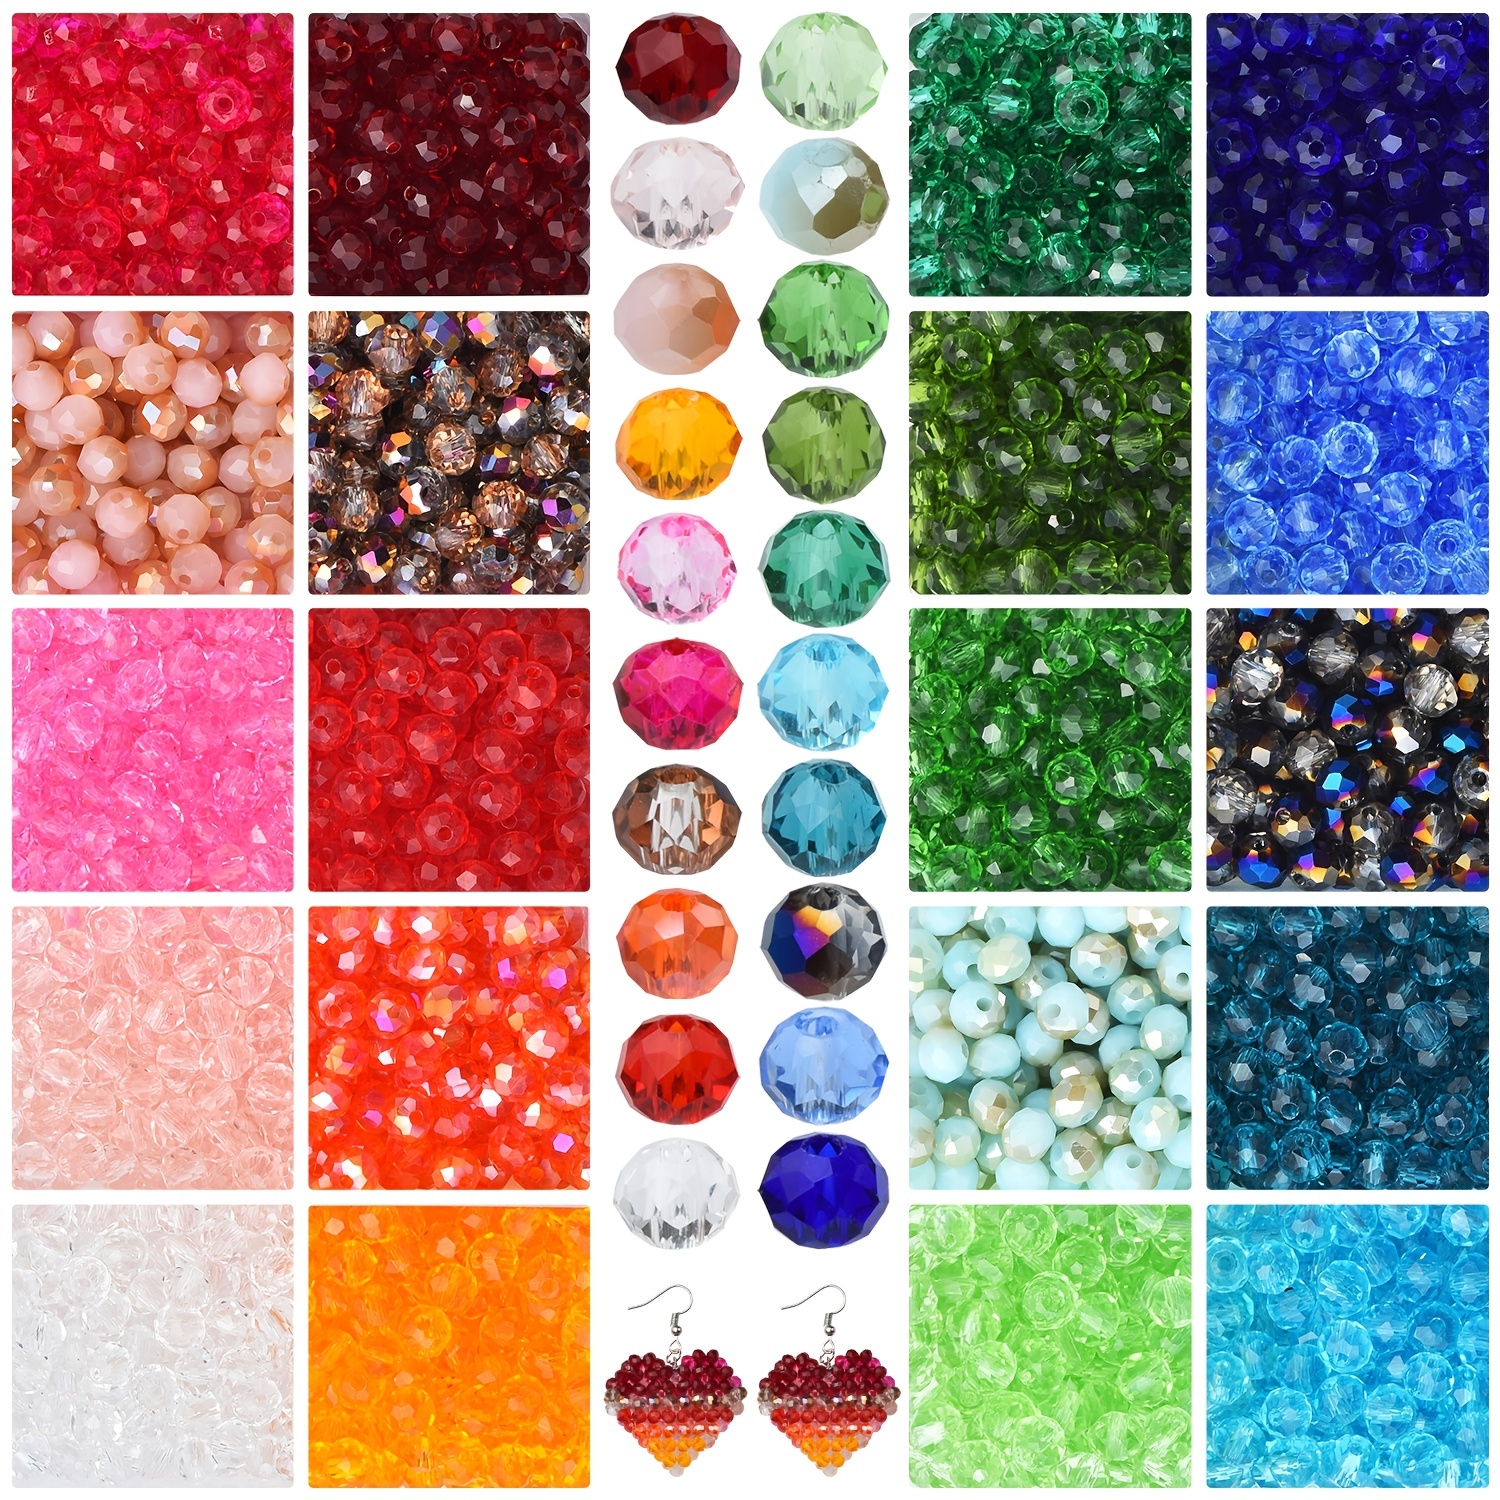 

3000pcs 10 Grids 2 Boxes Set 4mm Flat Beads Colorful Porcelain Jade Electroplated Symphony Crystal Glass Beads For Diy Earrings Bracelet Necklace Nail Art Mobile Phone Chain Jewelry Making Supplies